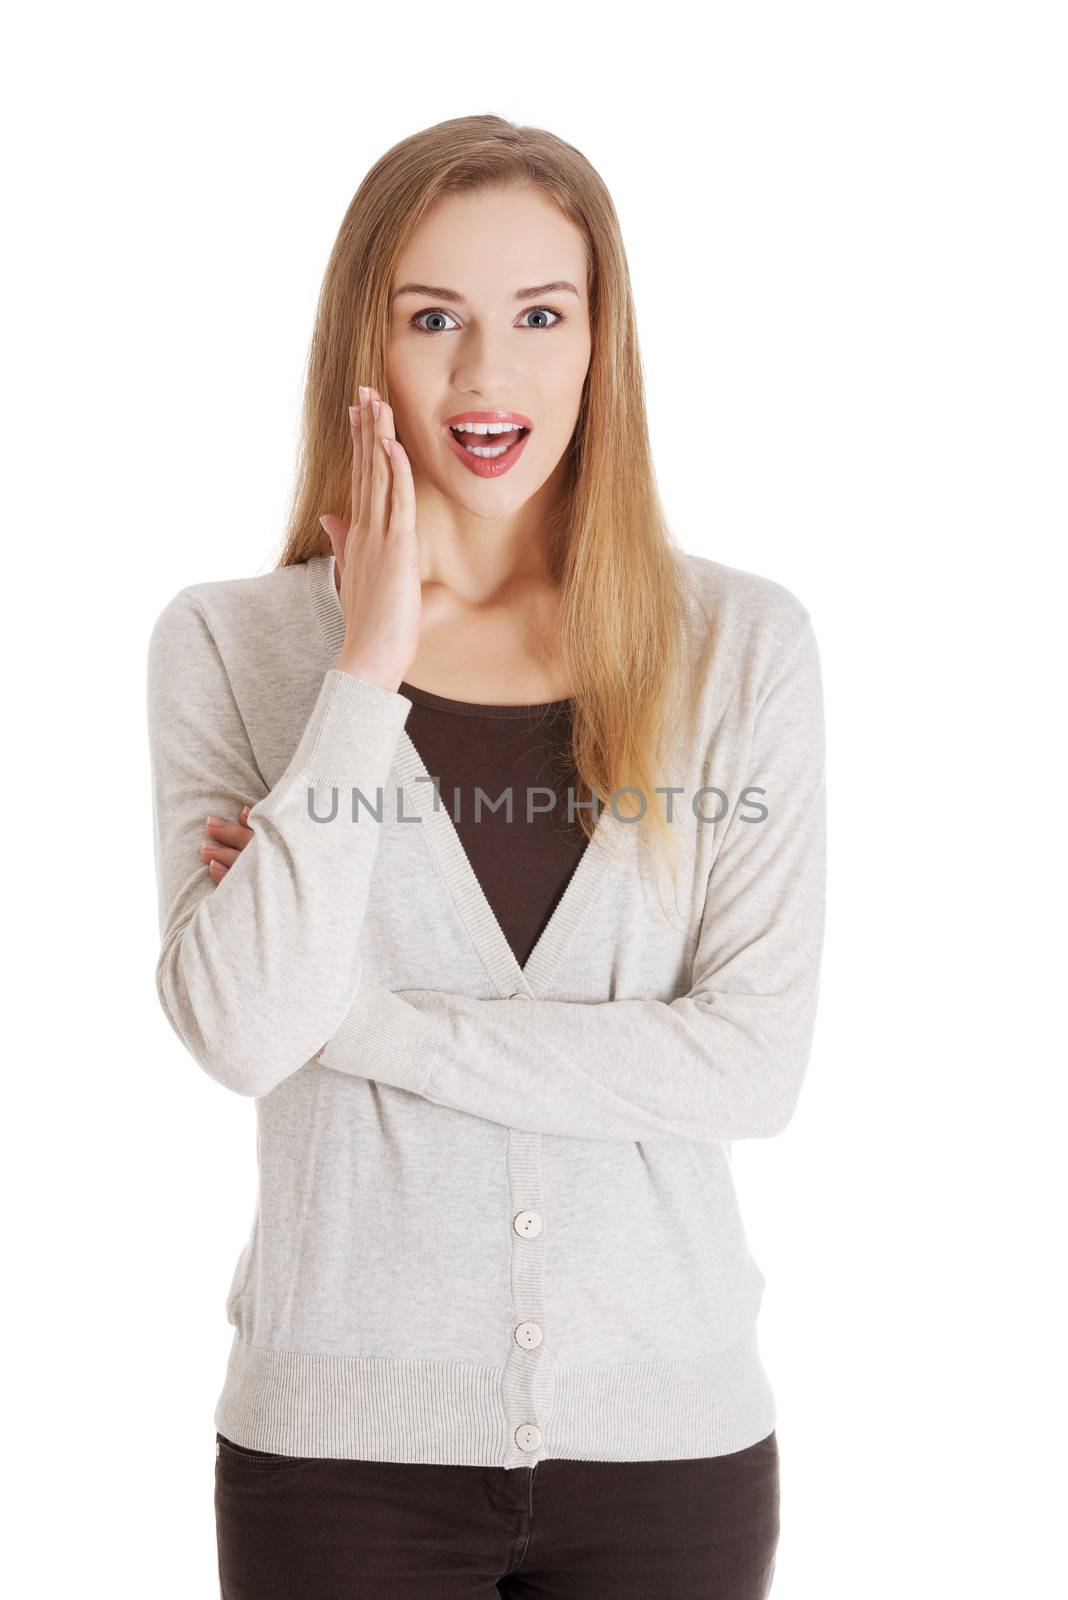 Beautiful positive and casual woman expressing surprise and advertising. Isolated on white.